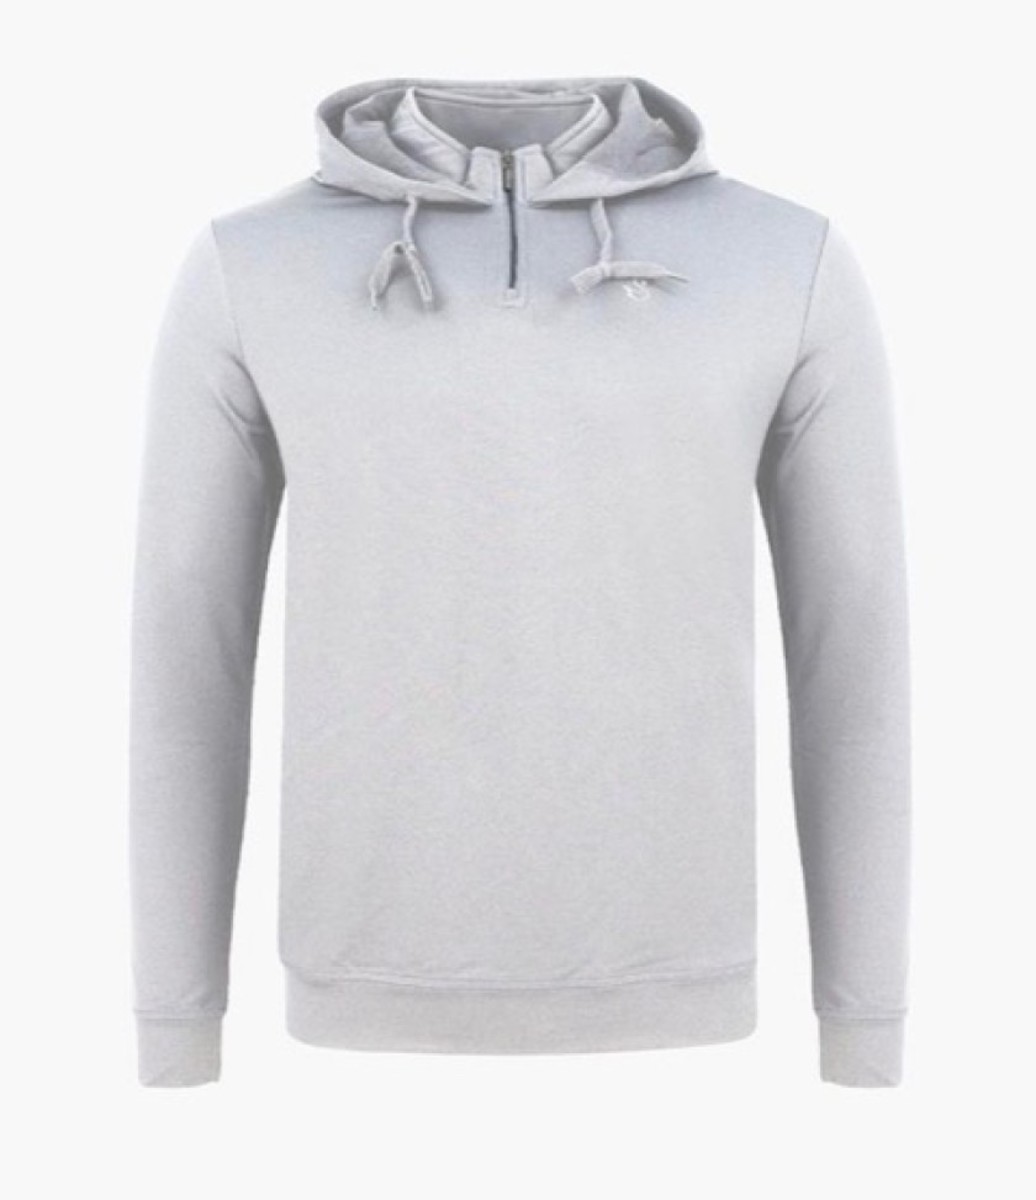 The Haag hoodie is an example of Swannies' attempt to loosen up golf's dress code. 